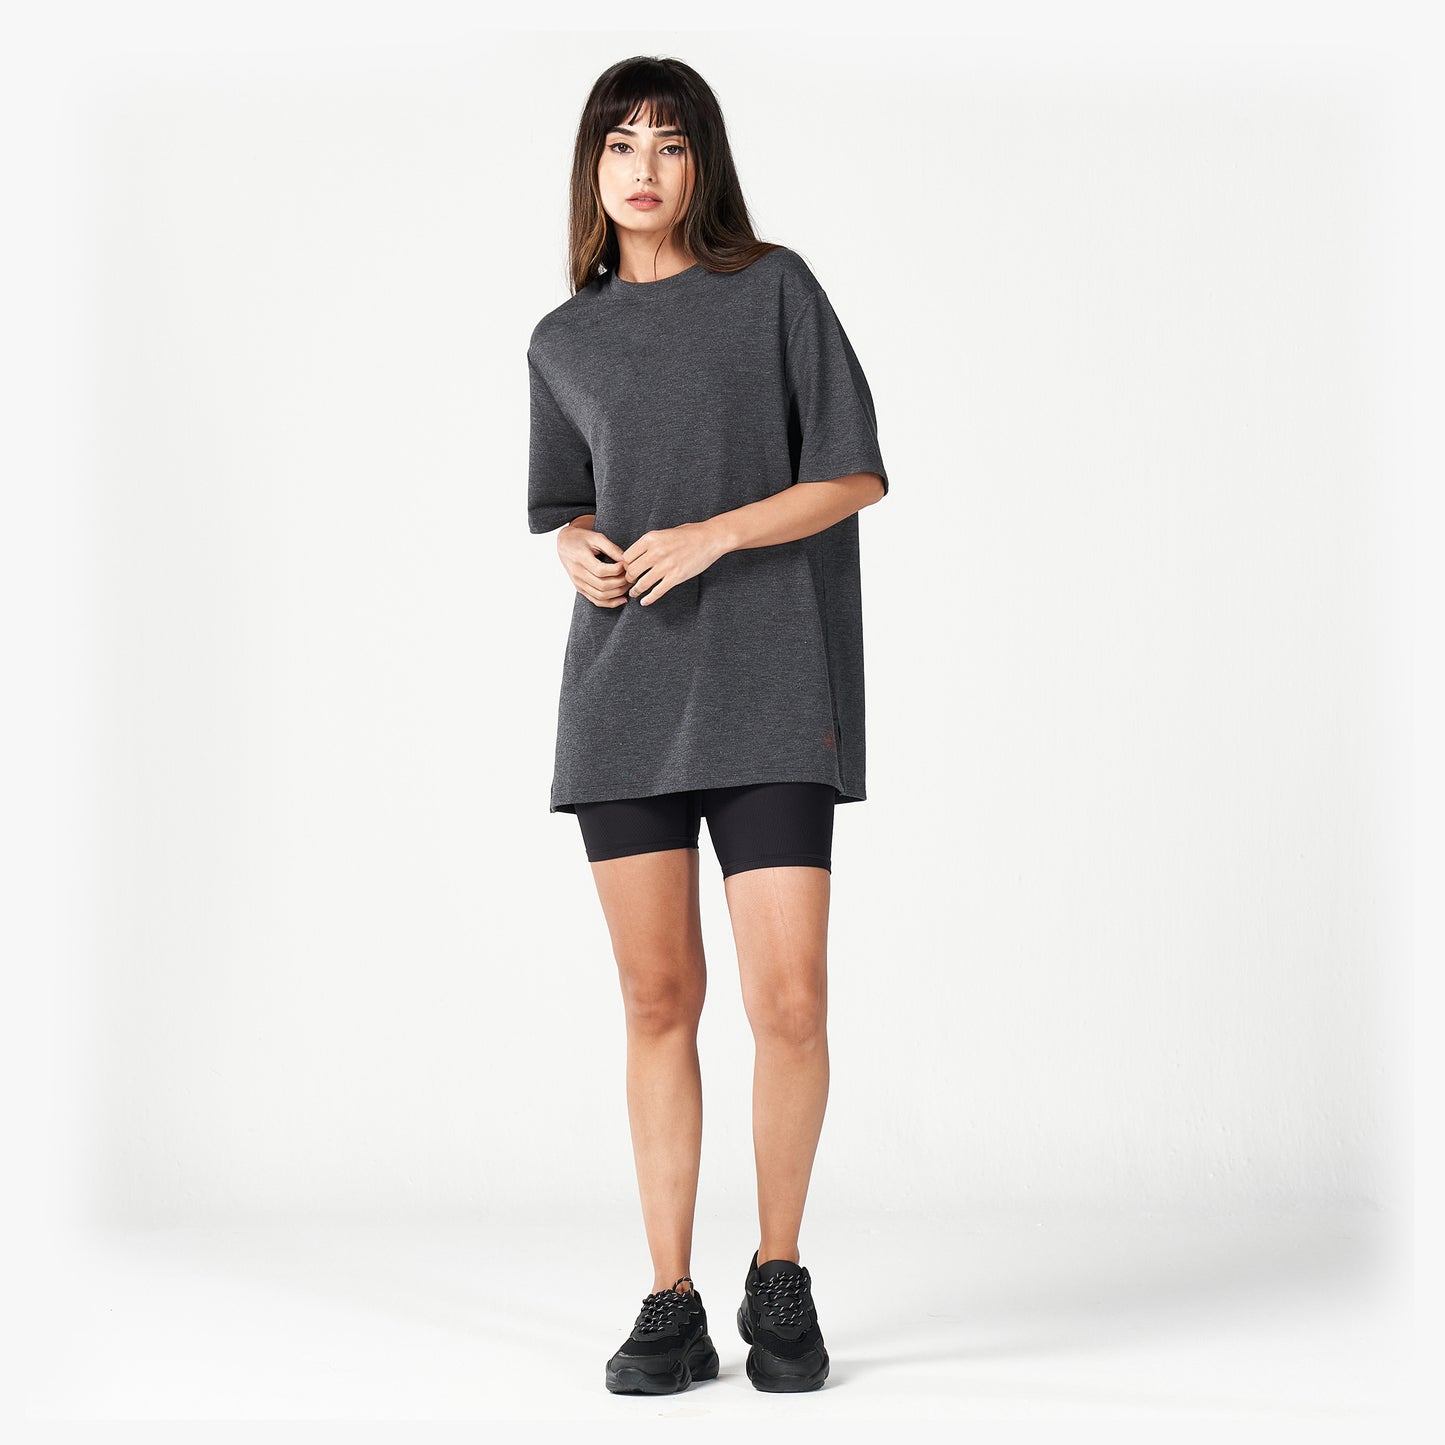 squatwolf-workout-clothes-code-oversized-live-in-tee-black-marl-gym-t-shirts-for-women